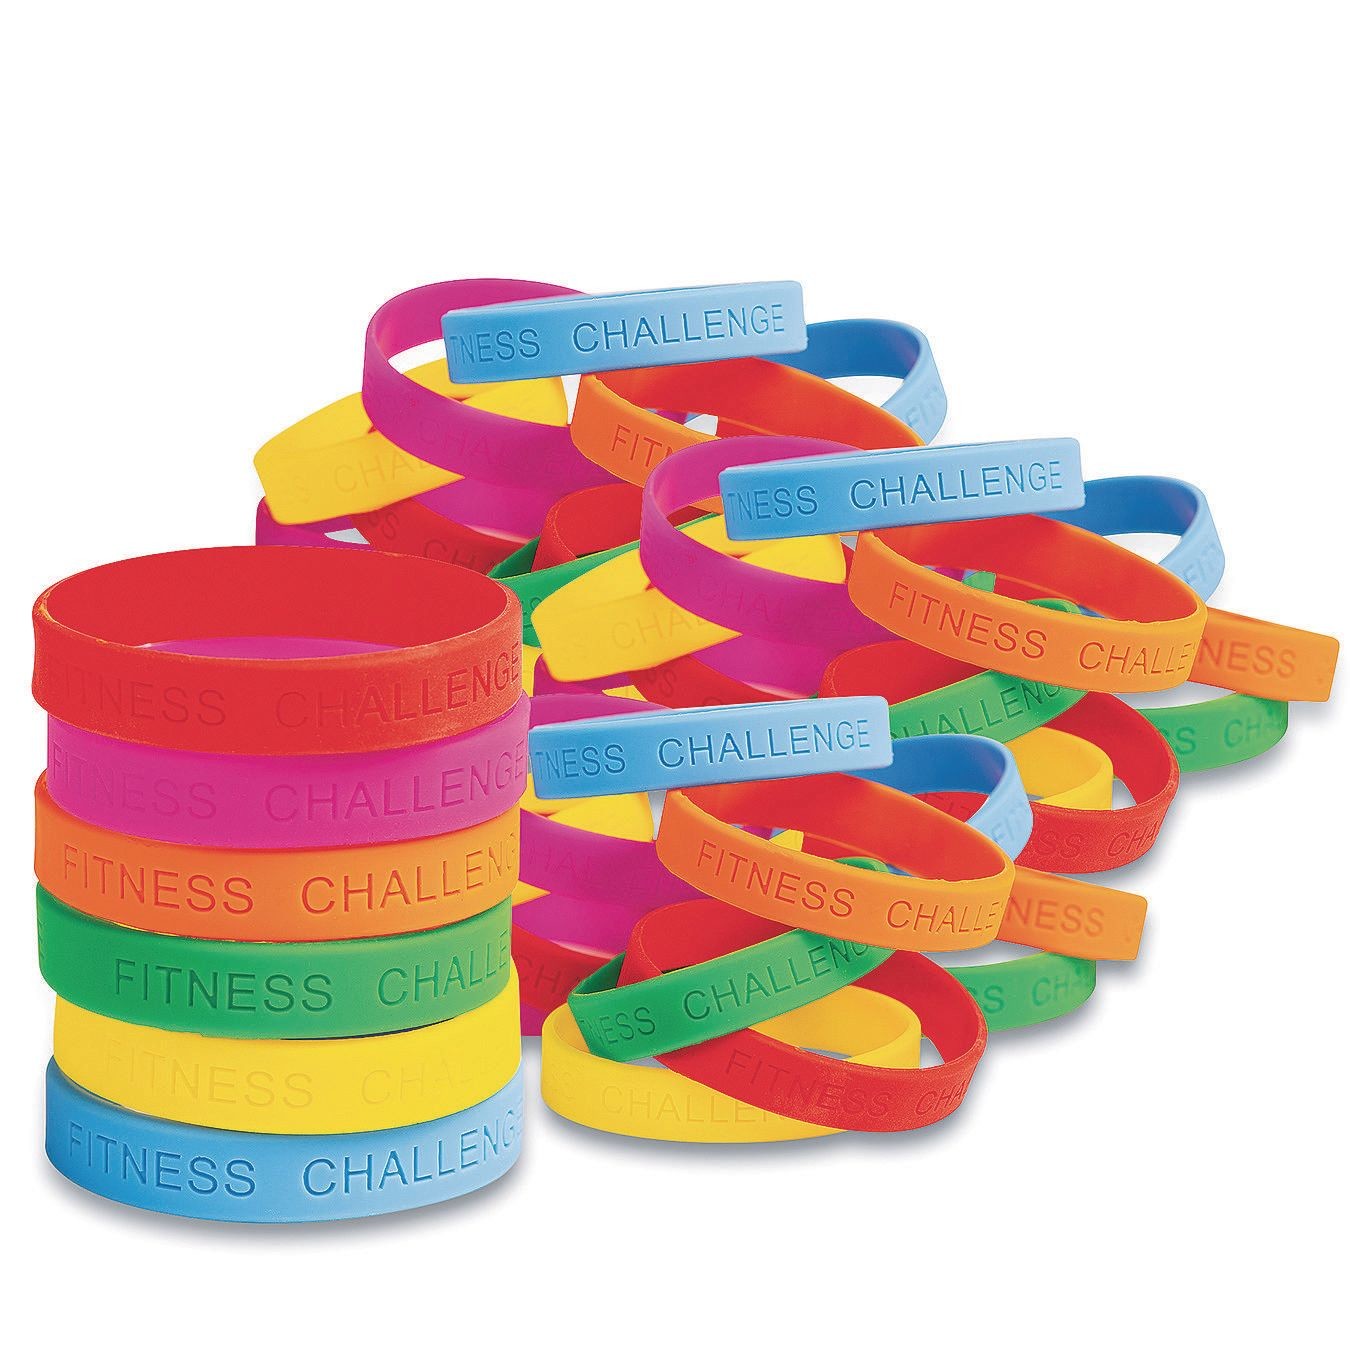 Mixed Silicone Rubber Bracelets Bulk & Wristbands For Men, Women, And  Children Lovely Party Bag Fillers & Fashion Jewelry From Hallo713119,  $11.16 | DHgate.Com